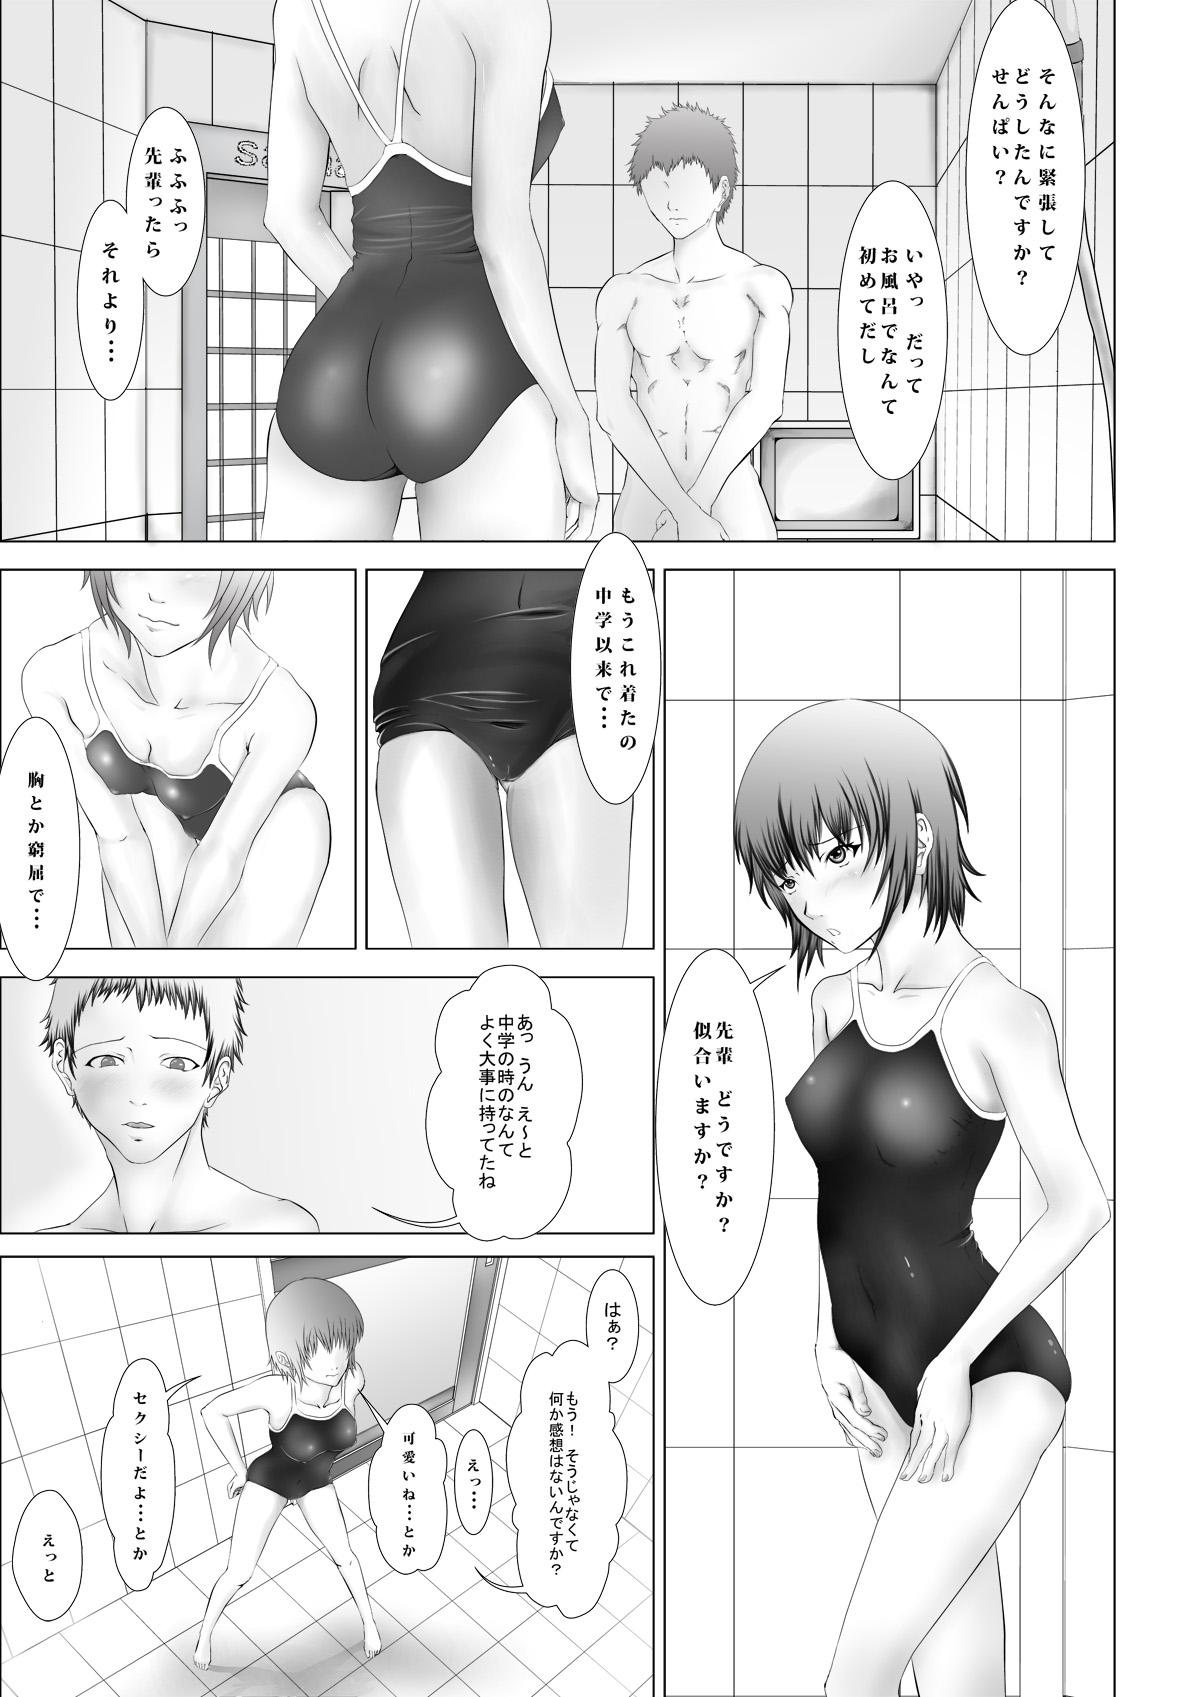 Outdoor 急所責めマニアックスvol.3 Furry - Page 2